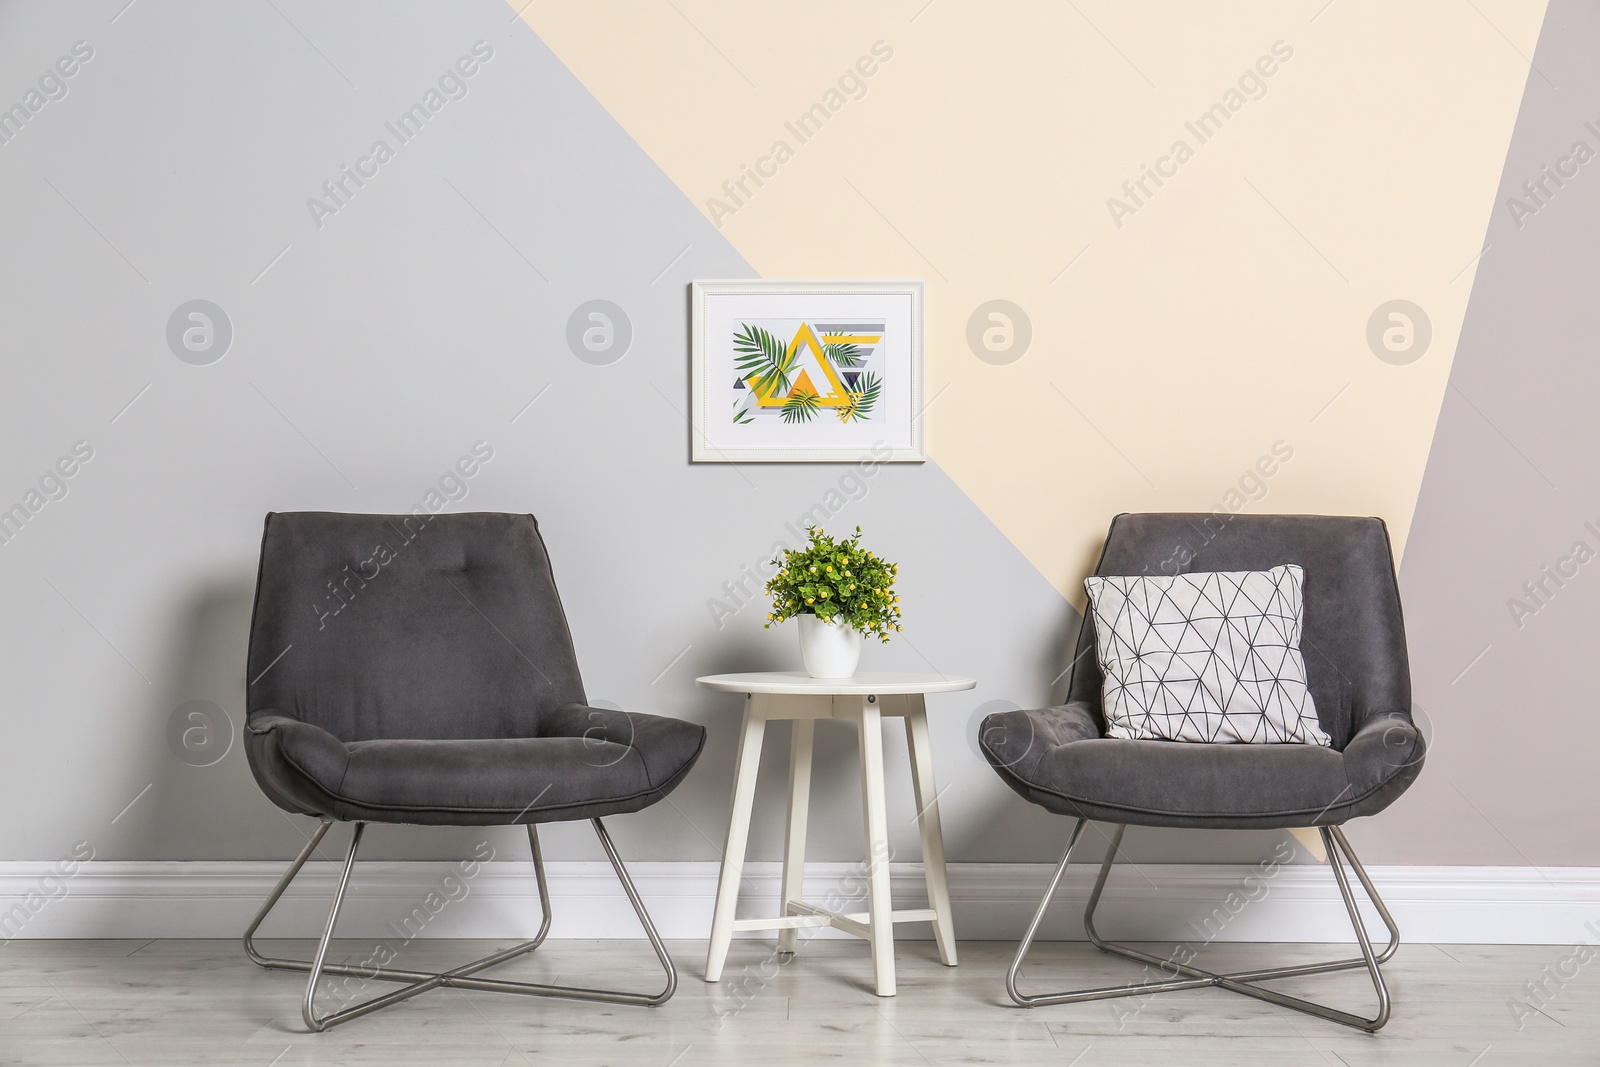 Photo of Room interior with modern chairs and table near color wall